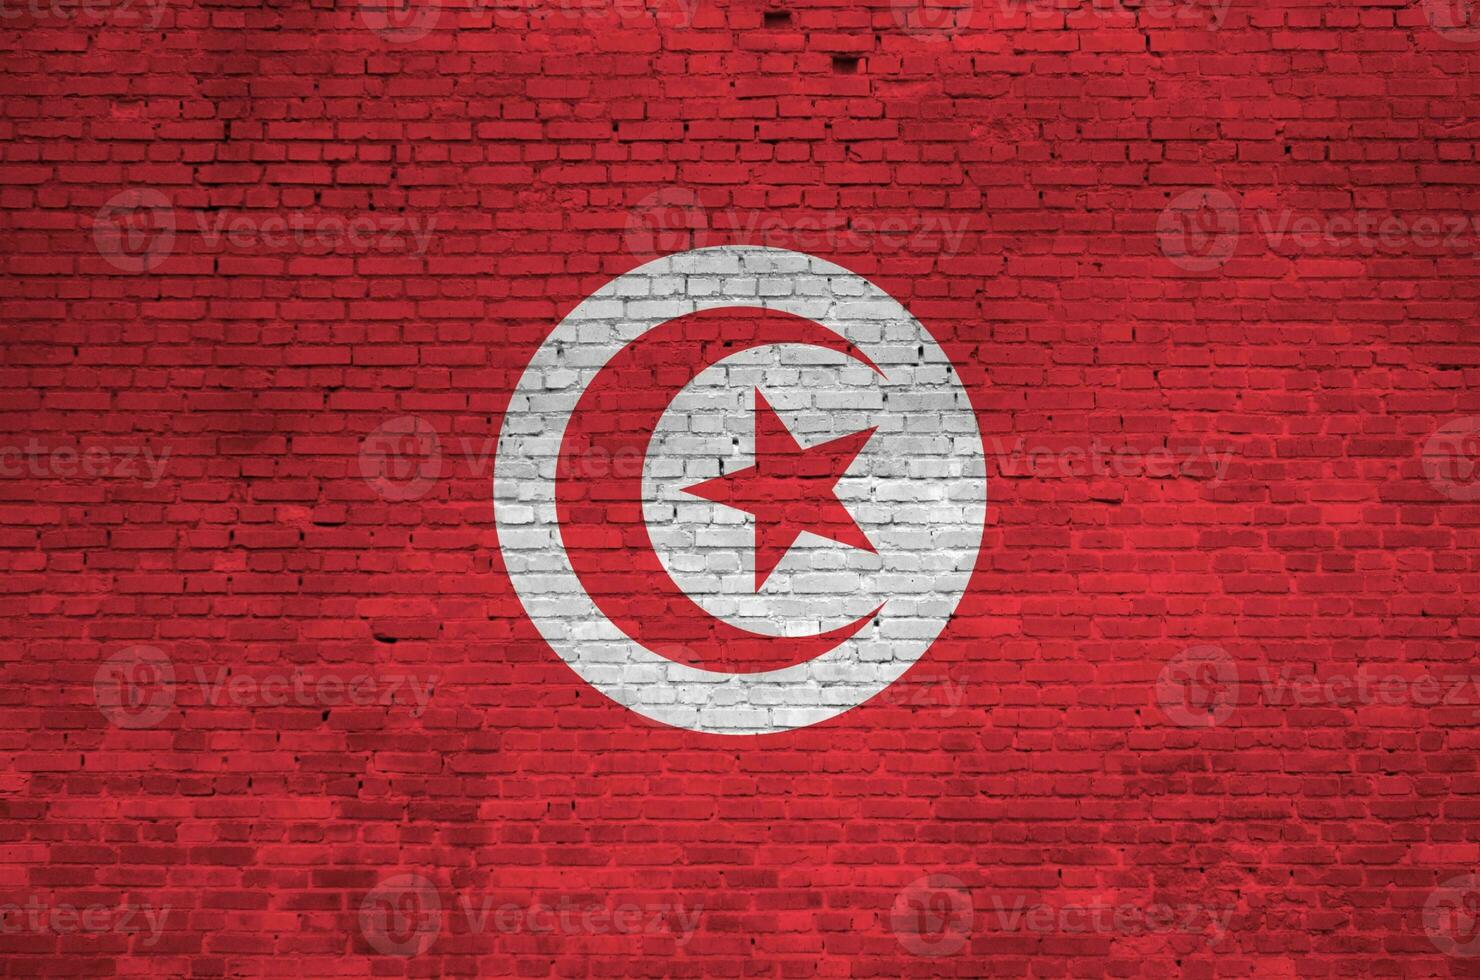 Tunisia flag depicted in paint colors on old brick wall. Textured banner on big brick wall masonry background photo